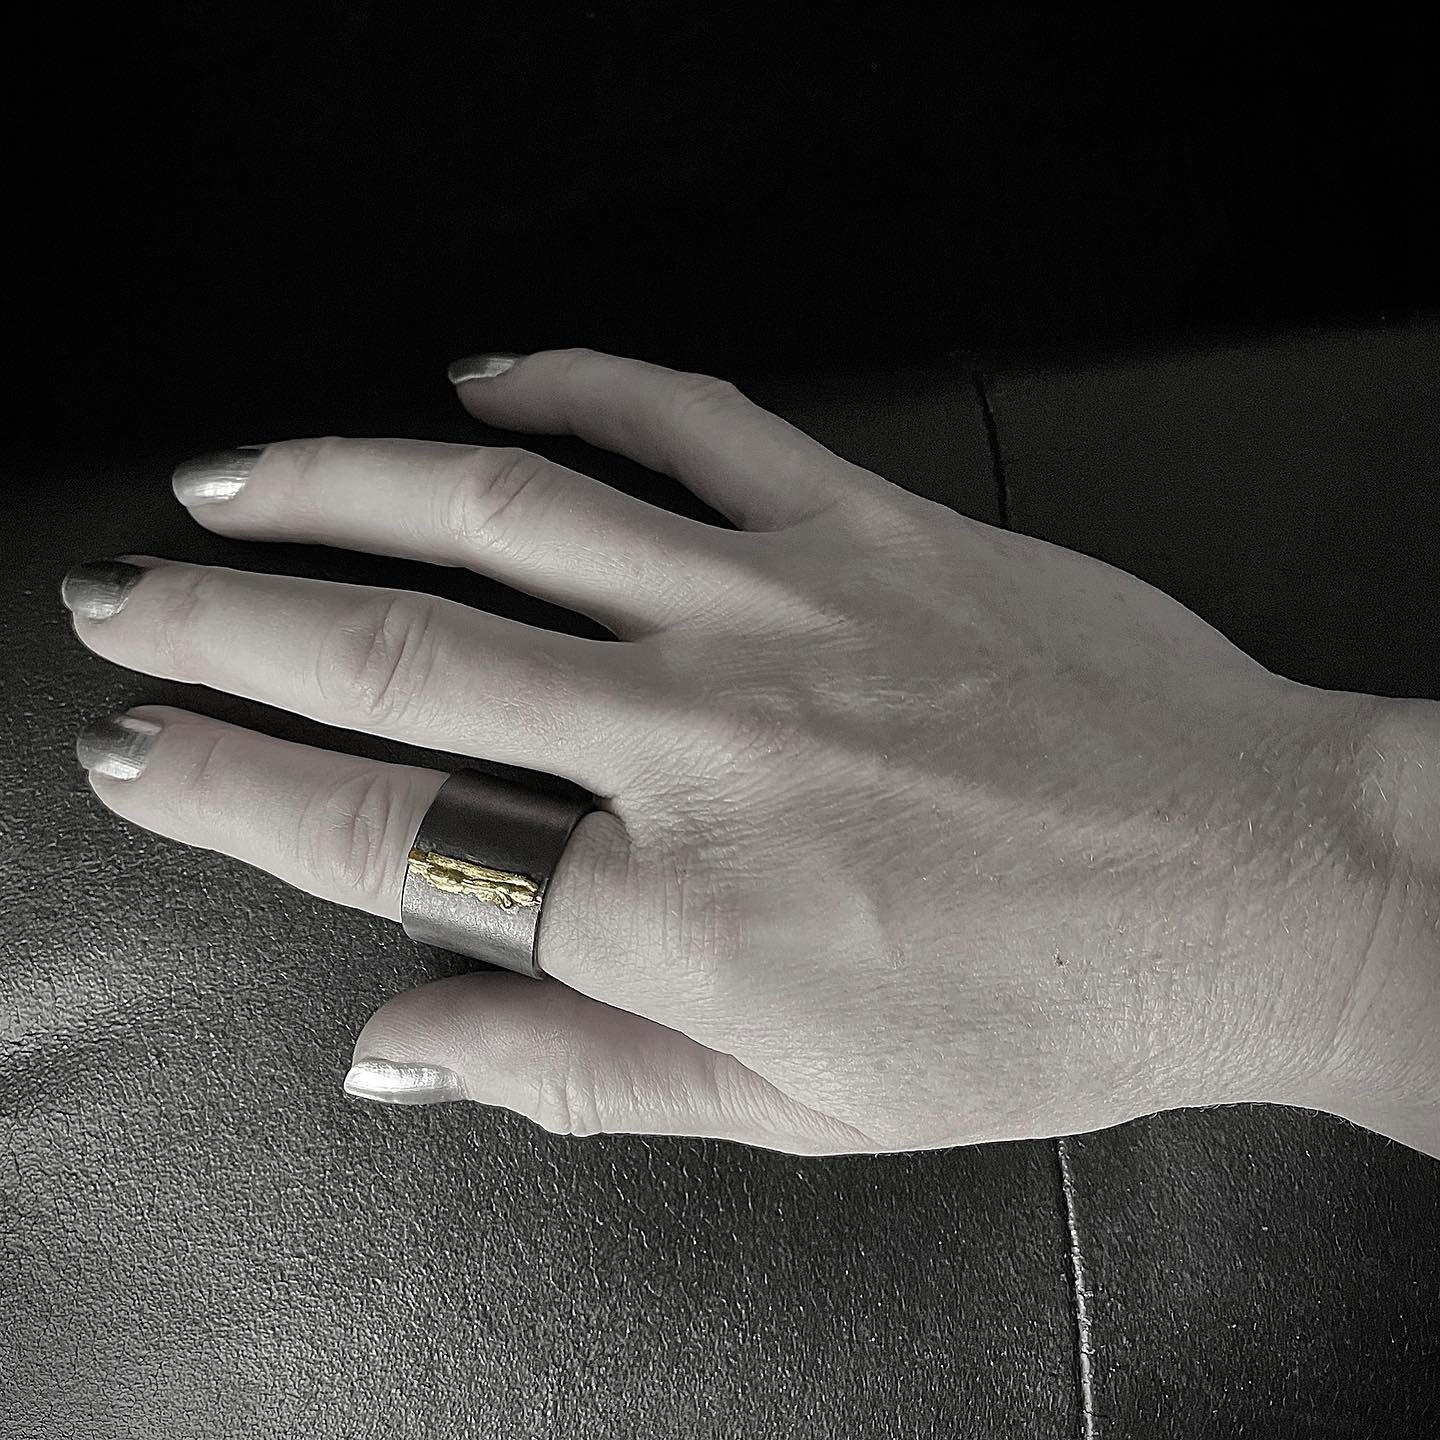 ️NOW ONLINE ️RIV ring, in black or silver, with 18 kt golden scar.Check it out by touching the image!•#handmadejewelry #unisexjewelry #instajewelry #avantgardejewelry #ring #silverring #18kt #gold #yellowgold #oxidisedjewellery #oxidisedsilverjewellery #scar #blacklovers #blackgold #artisanjewelry #darkluxury #darkfashionstyle #handcraftedjewelry #jewelry #jewellery #buylesschoosewell #madetoorder #raw #solid #minimal #urbanstyle #bkrebjewelryberlin